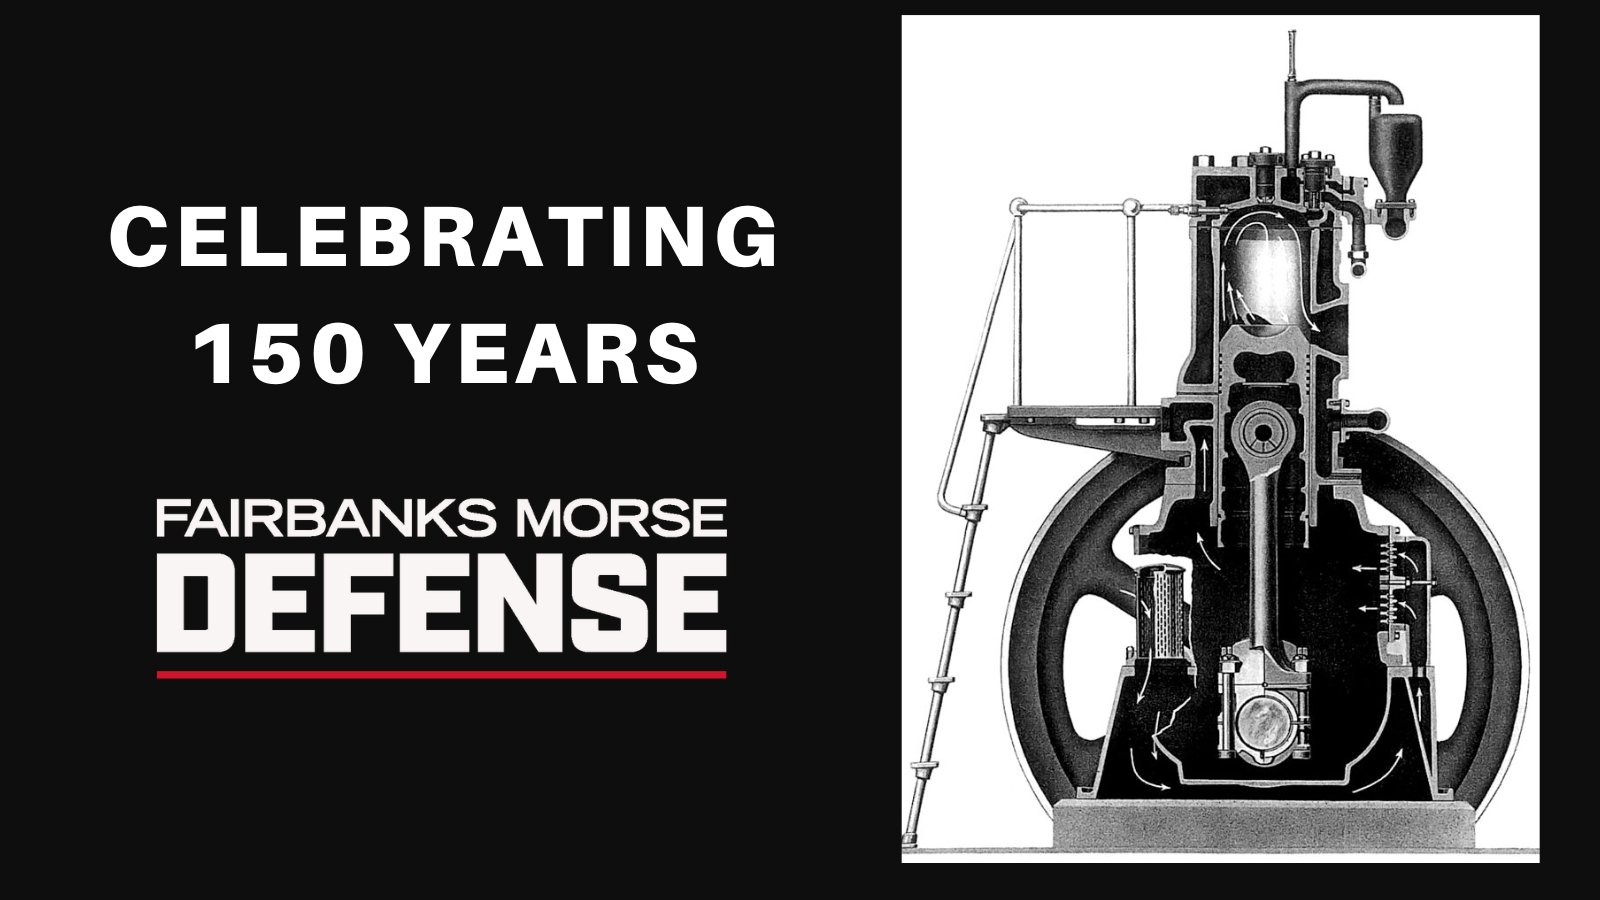 Fairbanks Morse Defense on X: The Fairbanks Morse Model Y semi-diesel  engine was a springboard for railway and marine applications. While history  still recognizes @FairbanksMorse as a world-renowned engine builder, today  we're